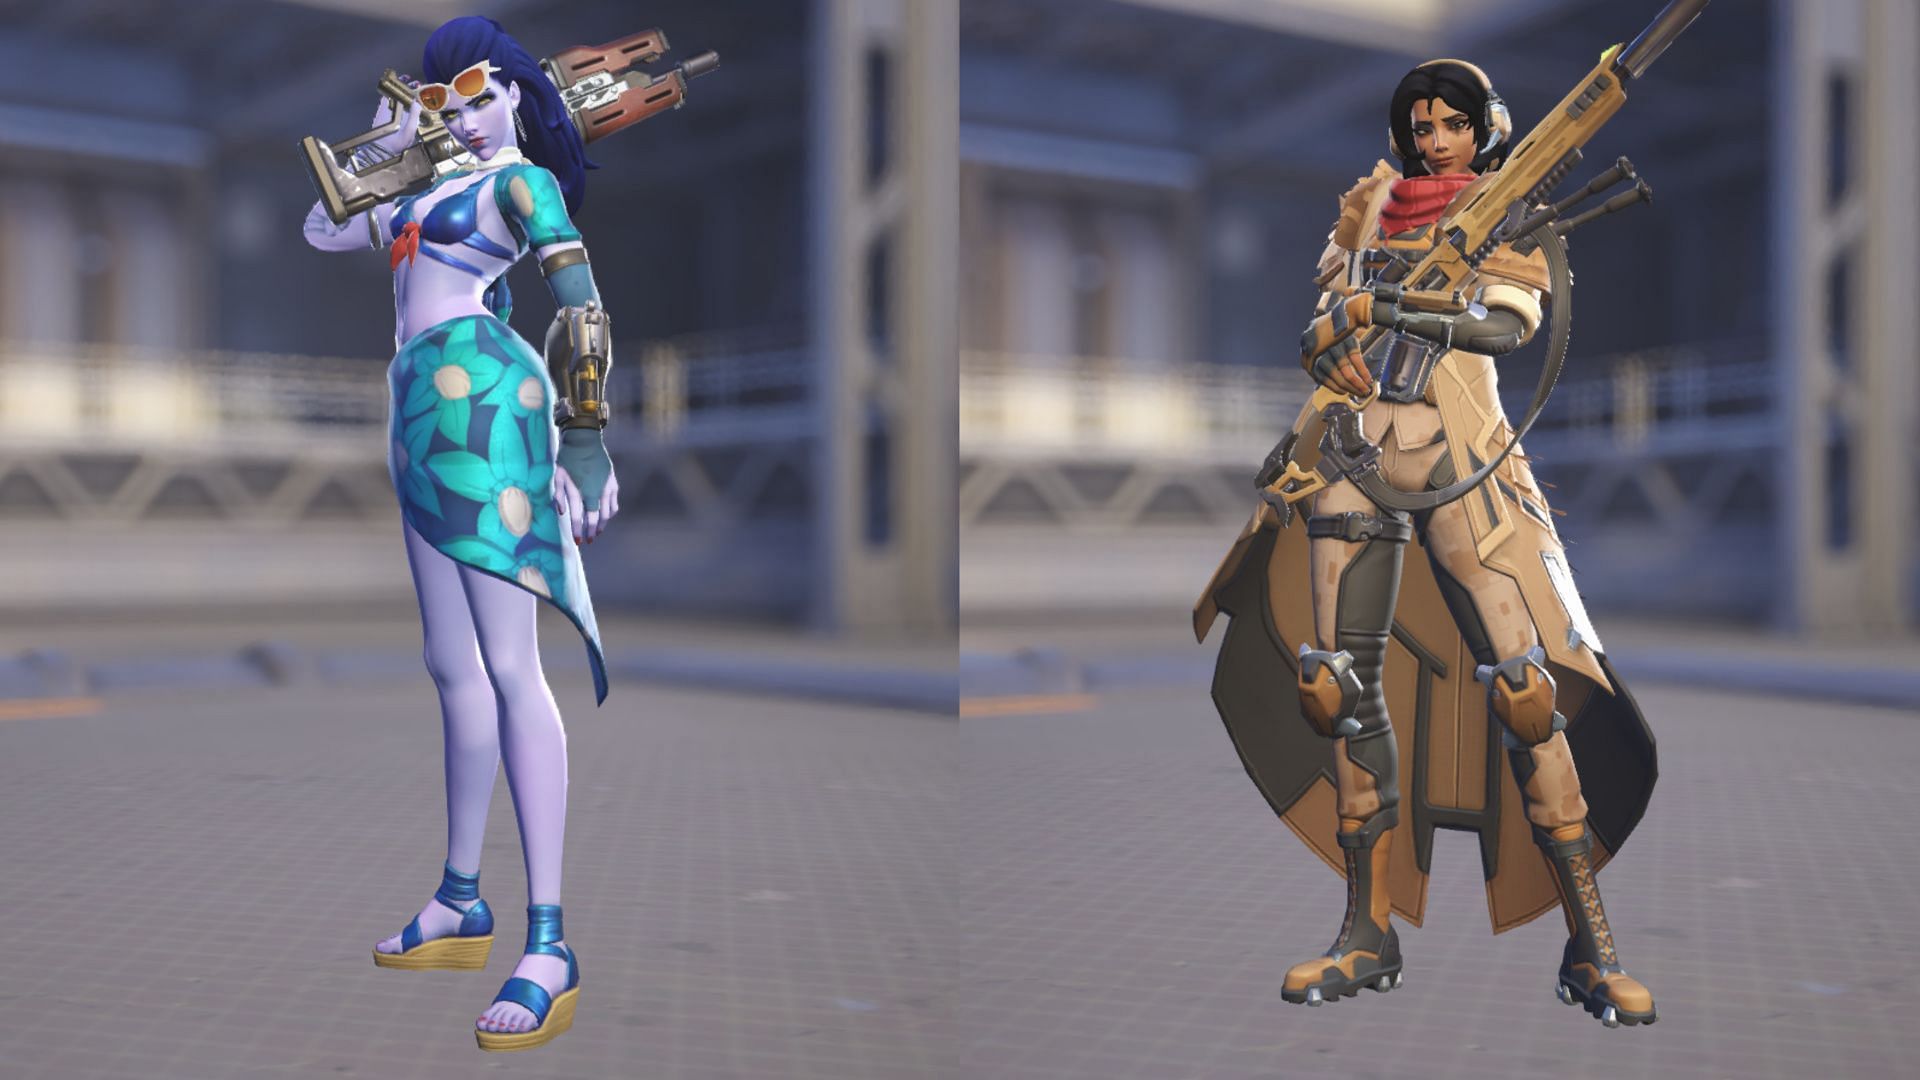 Featuring the Cote D&#039;Azur Widowmaker and Sniper Ana skins. (Image via Blizzard Entertainment)